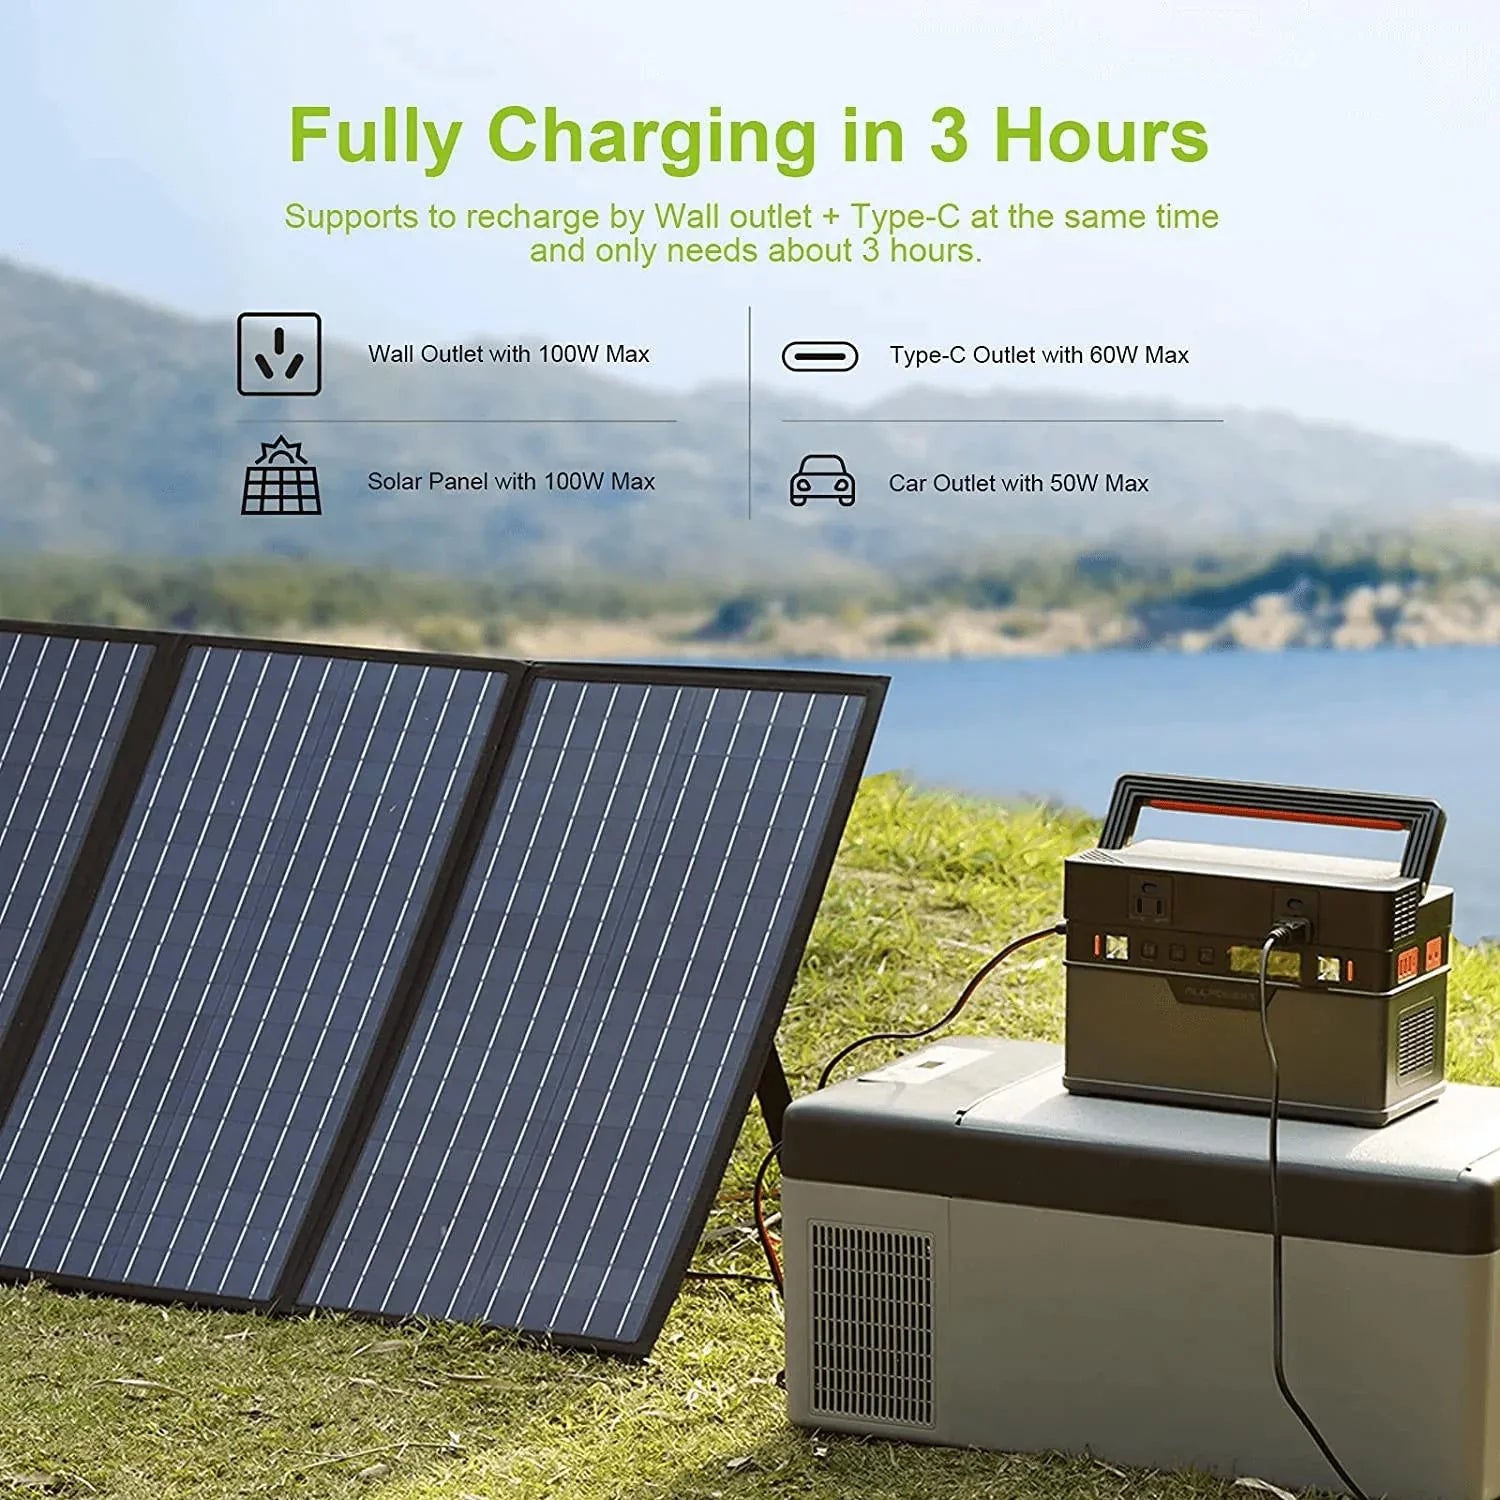 ALLPOWERS S700 Portable Power Station 700W 606Wh with Solar Panels